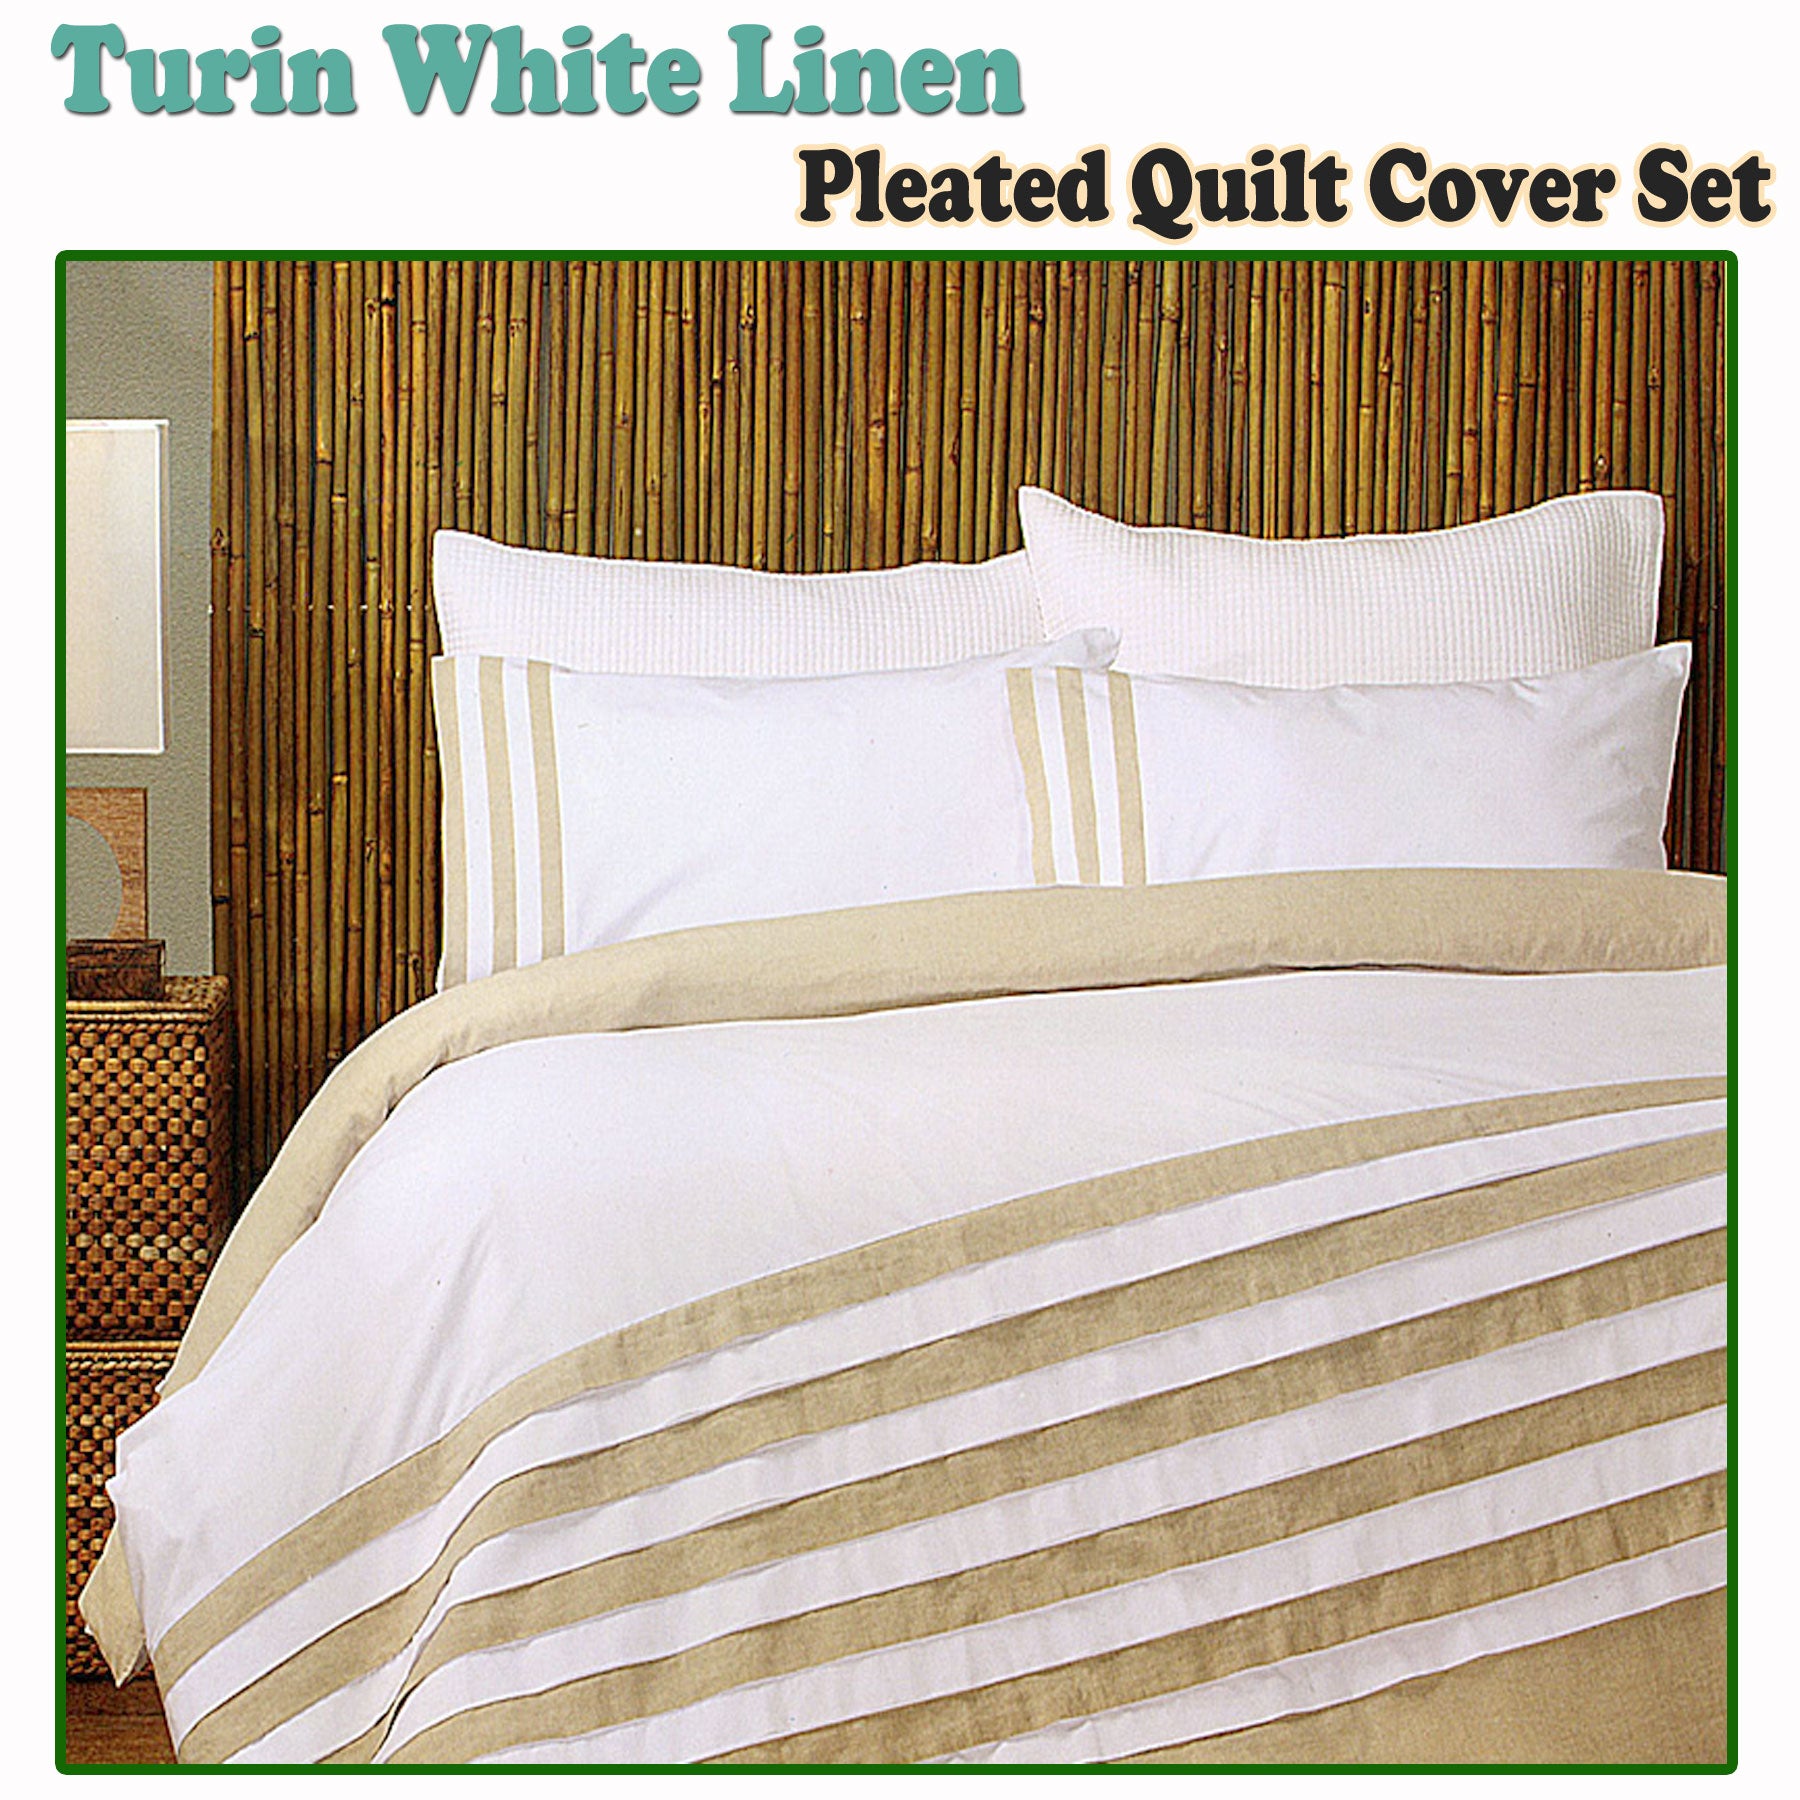 Turin White Linen Quilt Cover Set QUEEN